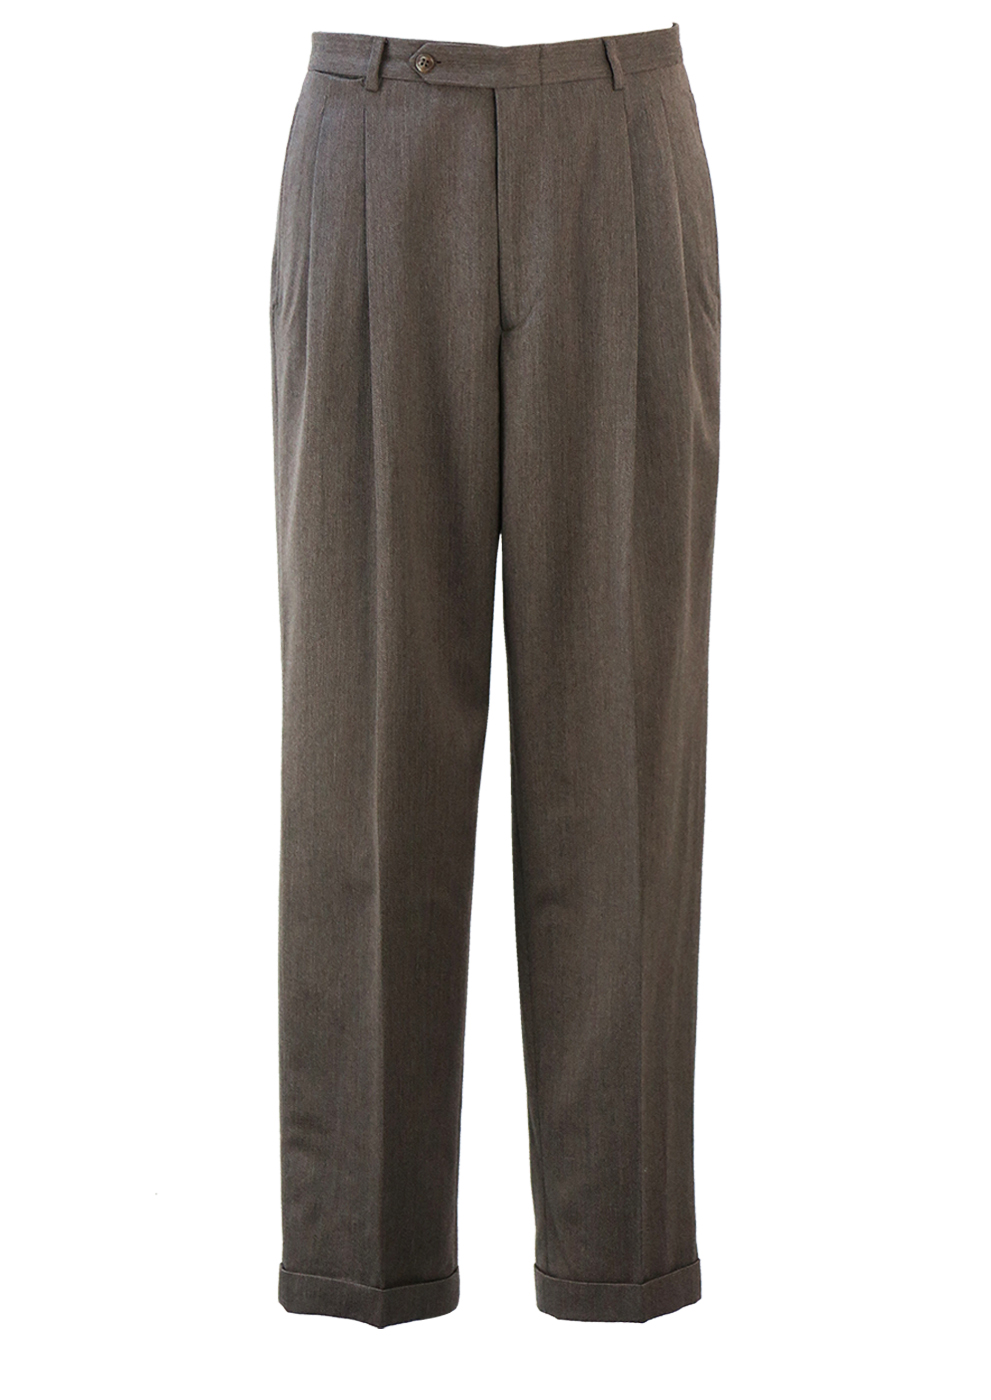 Brown & Cream Mottled Wool, Pleat Front Tailored Trousers with Turn Ups ...